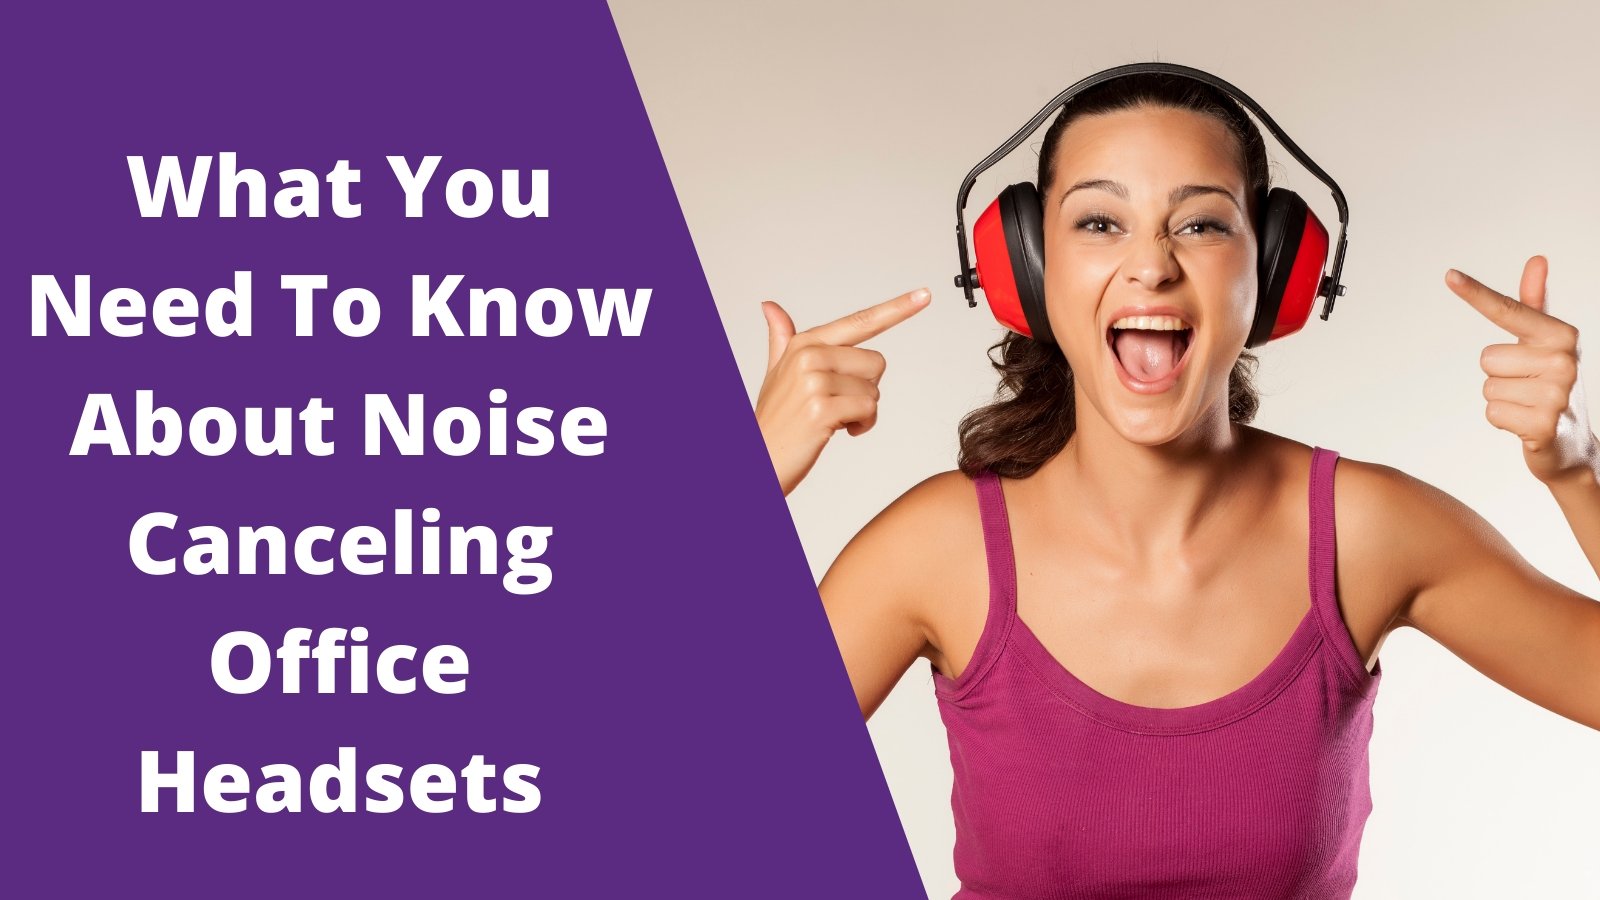 What You Need To Know About Noise Canceling Office Headsets - Headset Advisor